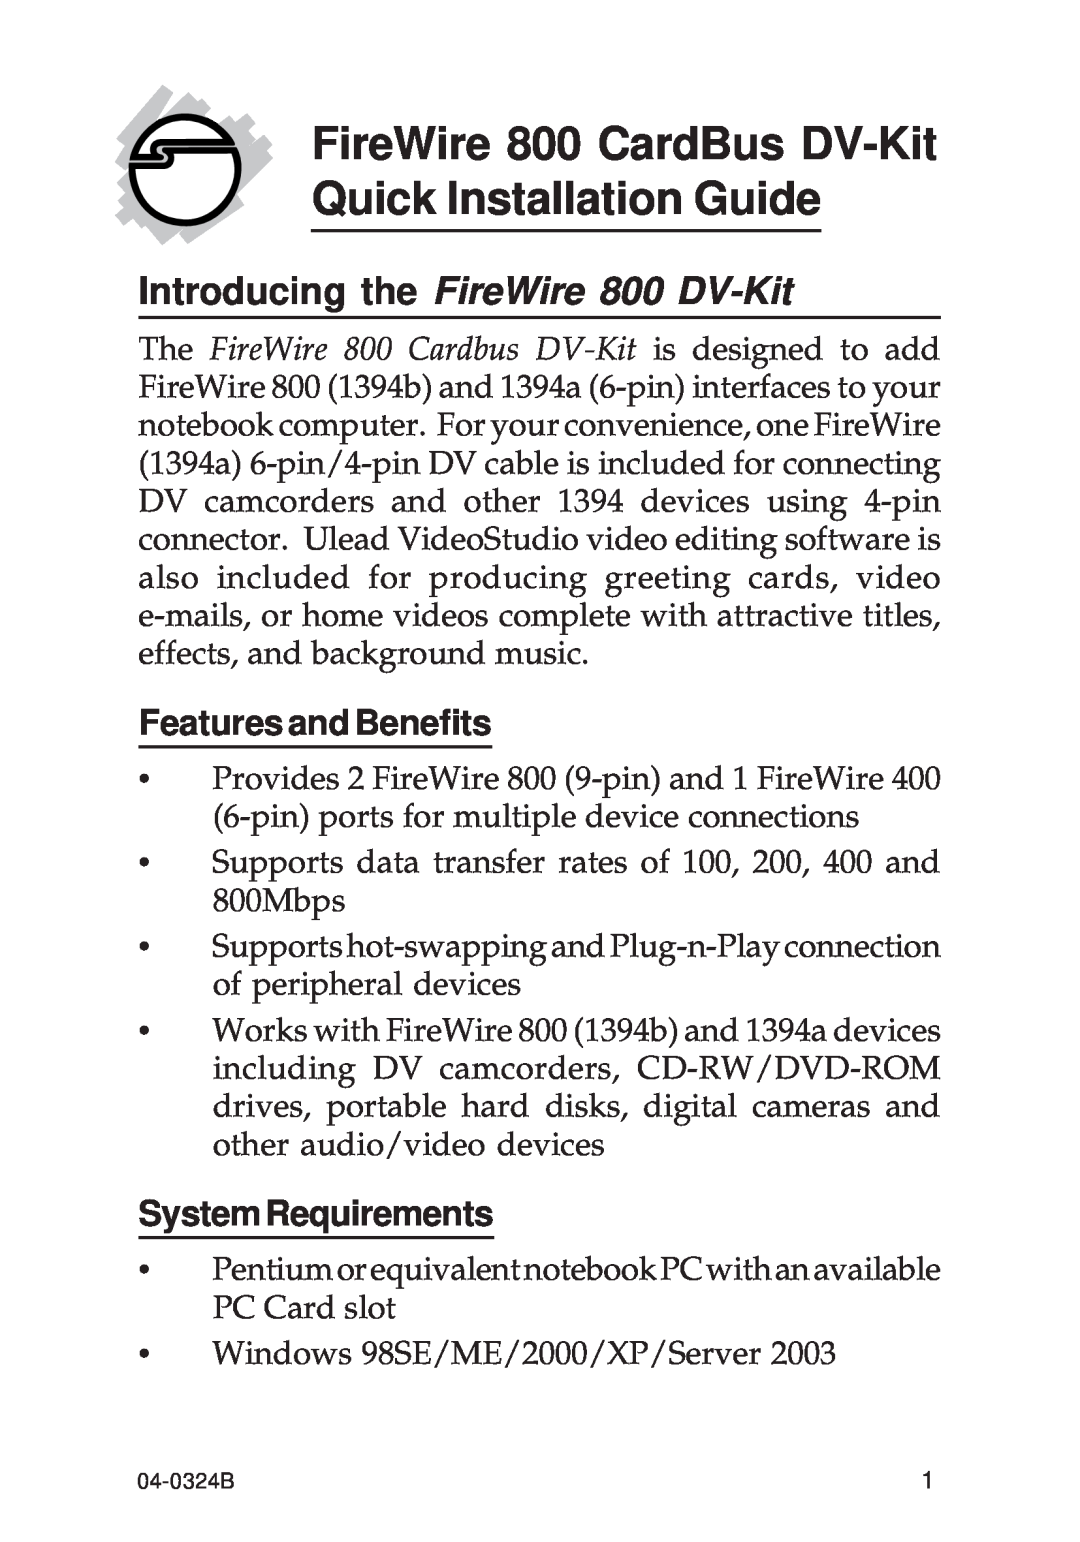 SIIG 700 manual Features and Benefits, SystemRequirements, PackageContents, Introducing the FireWire 800 ExpressCard 